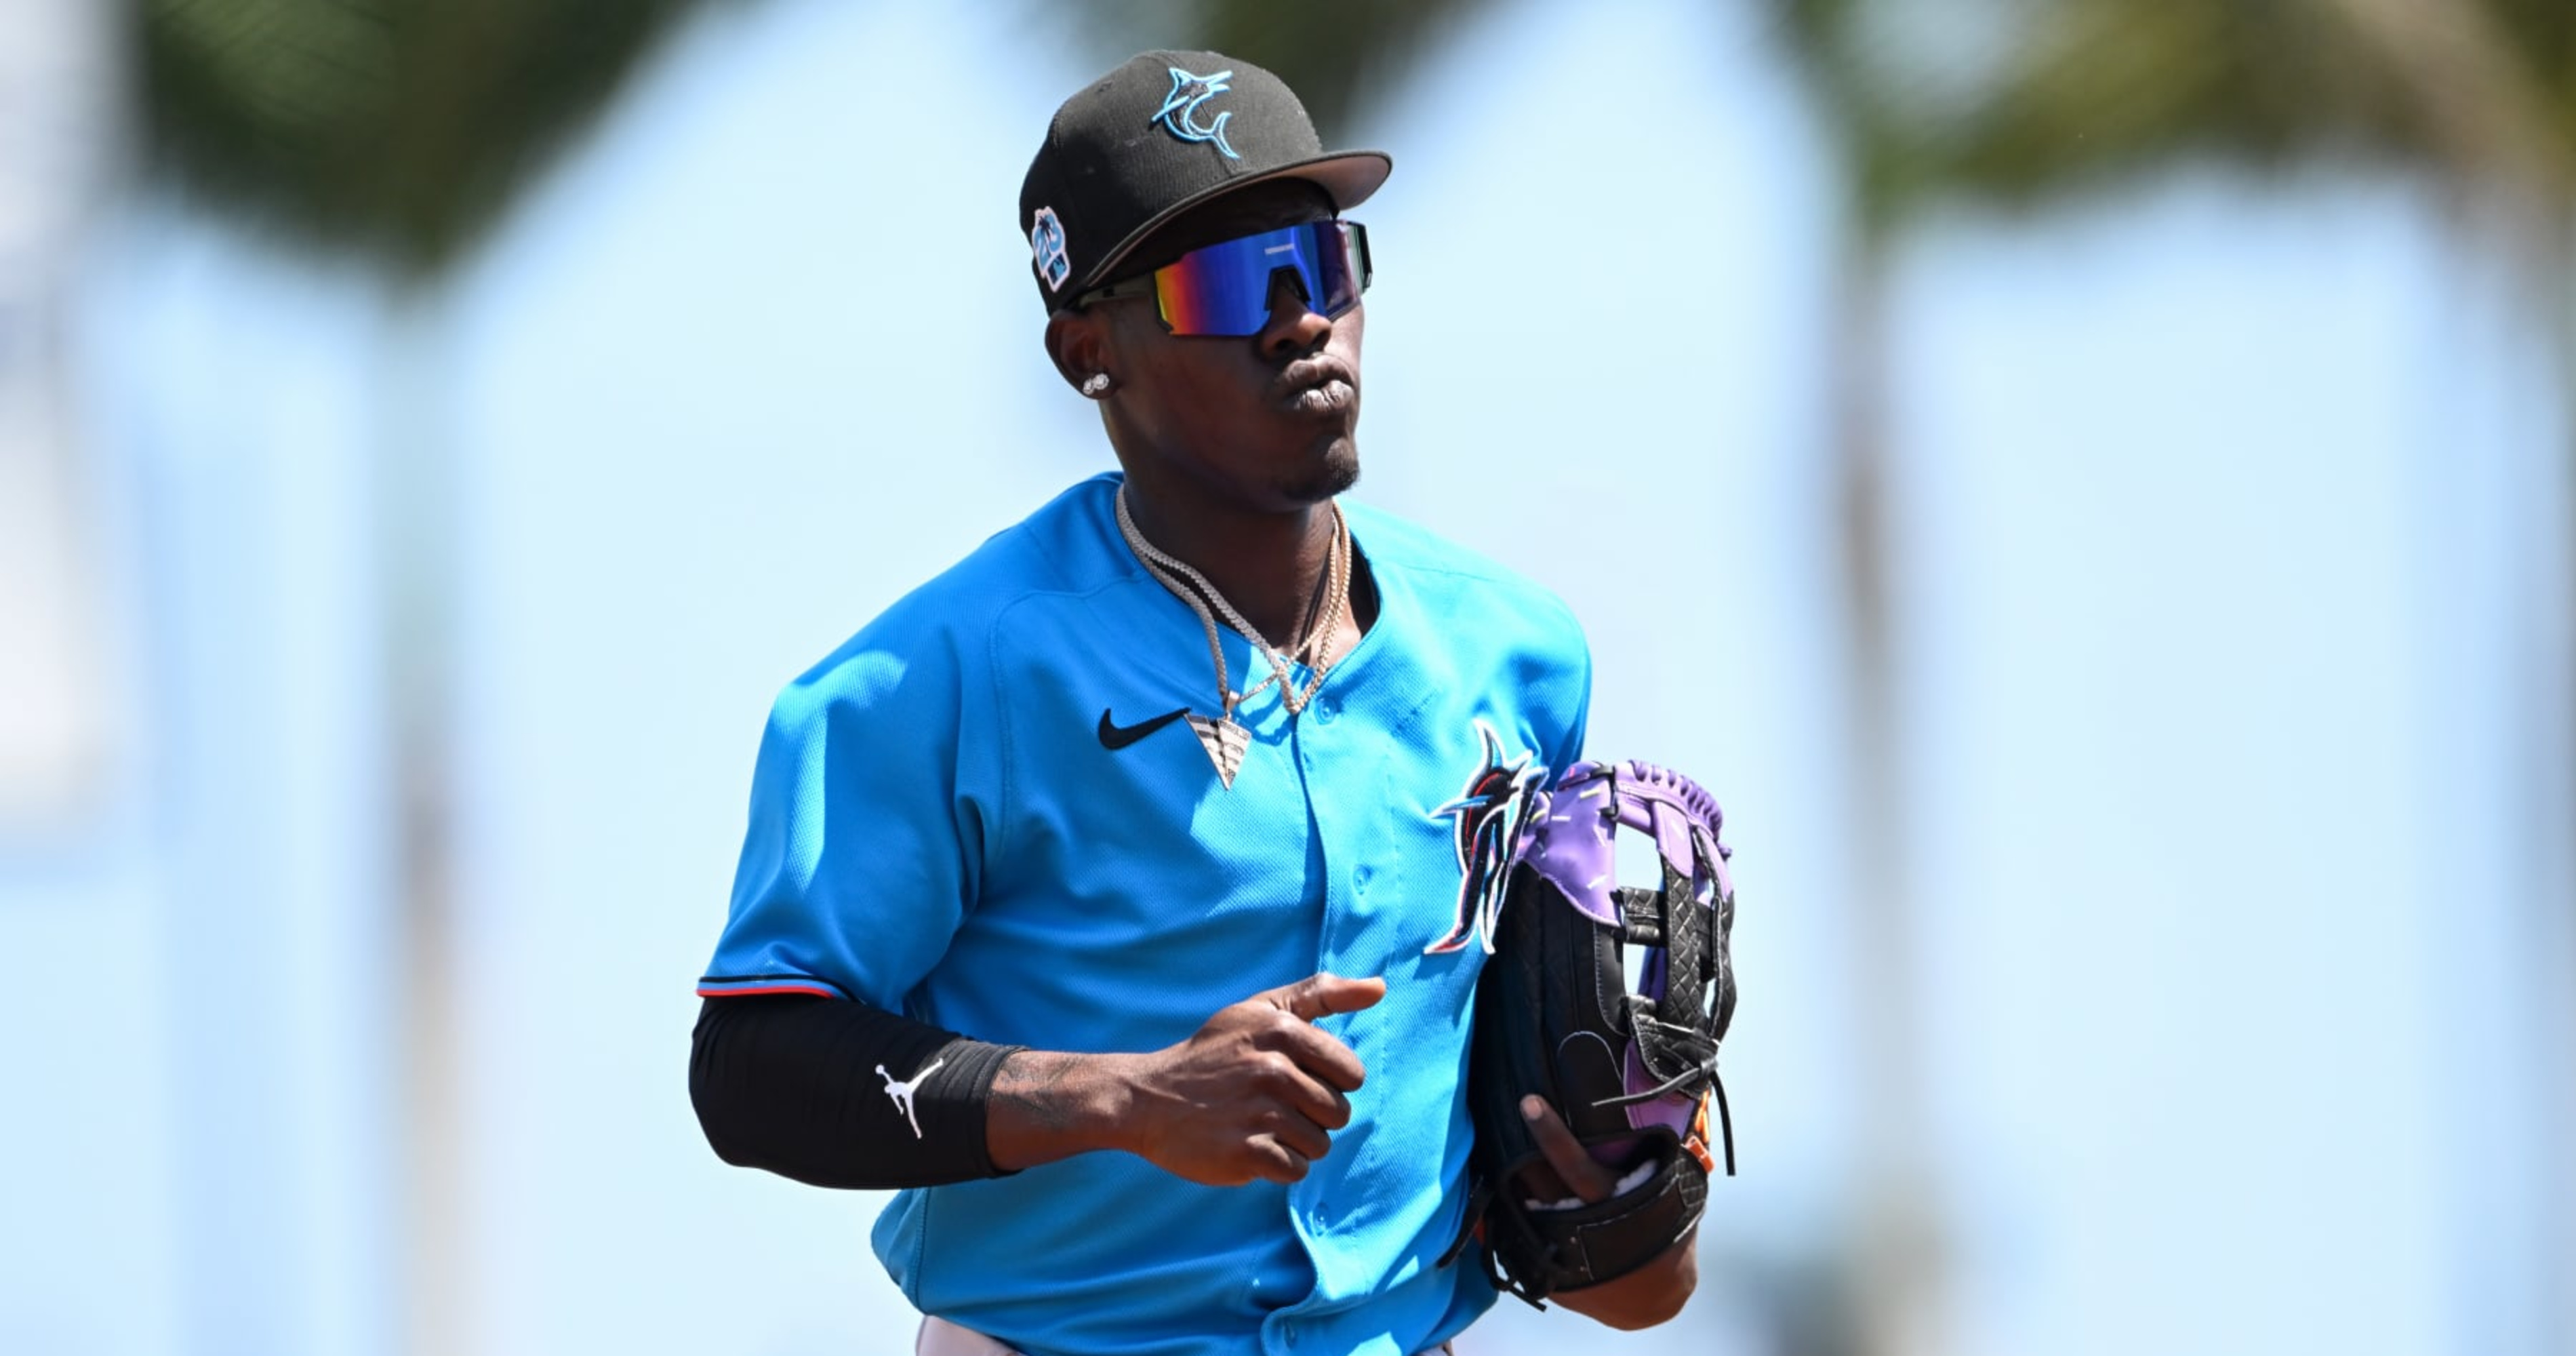 Jazz Chisholm Jr. is MLB's Most Exciting Player - Fastball